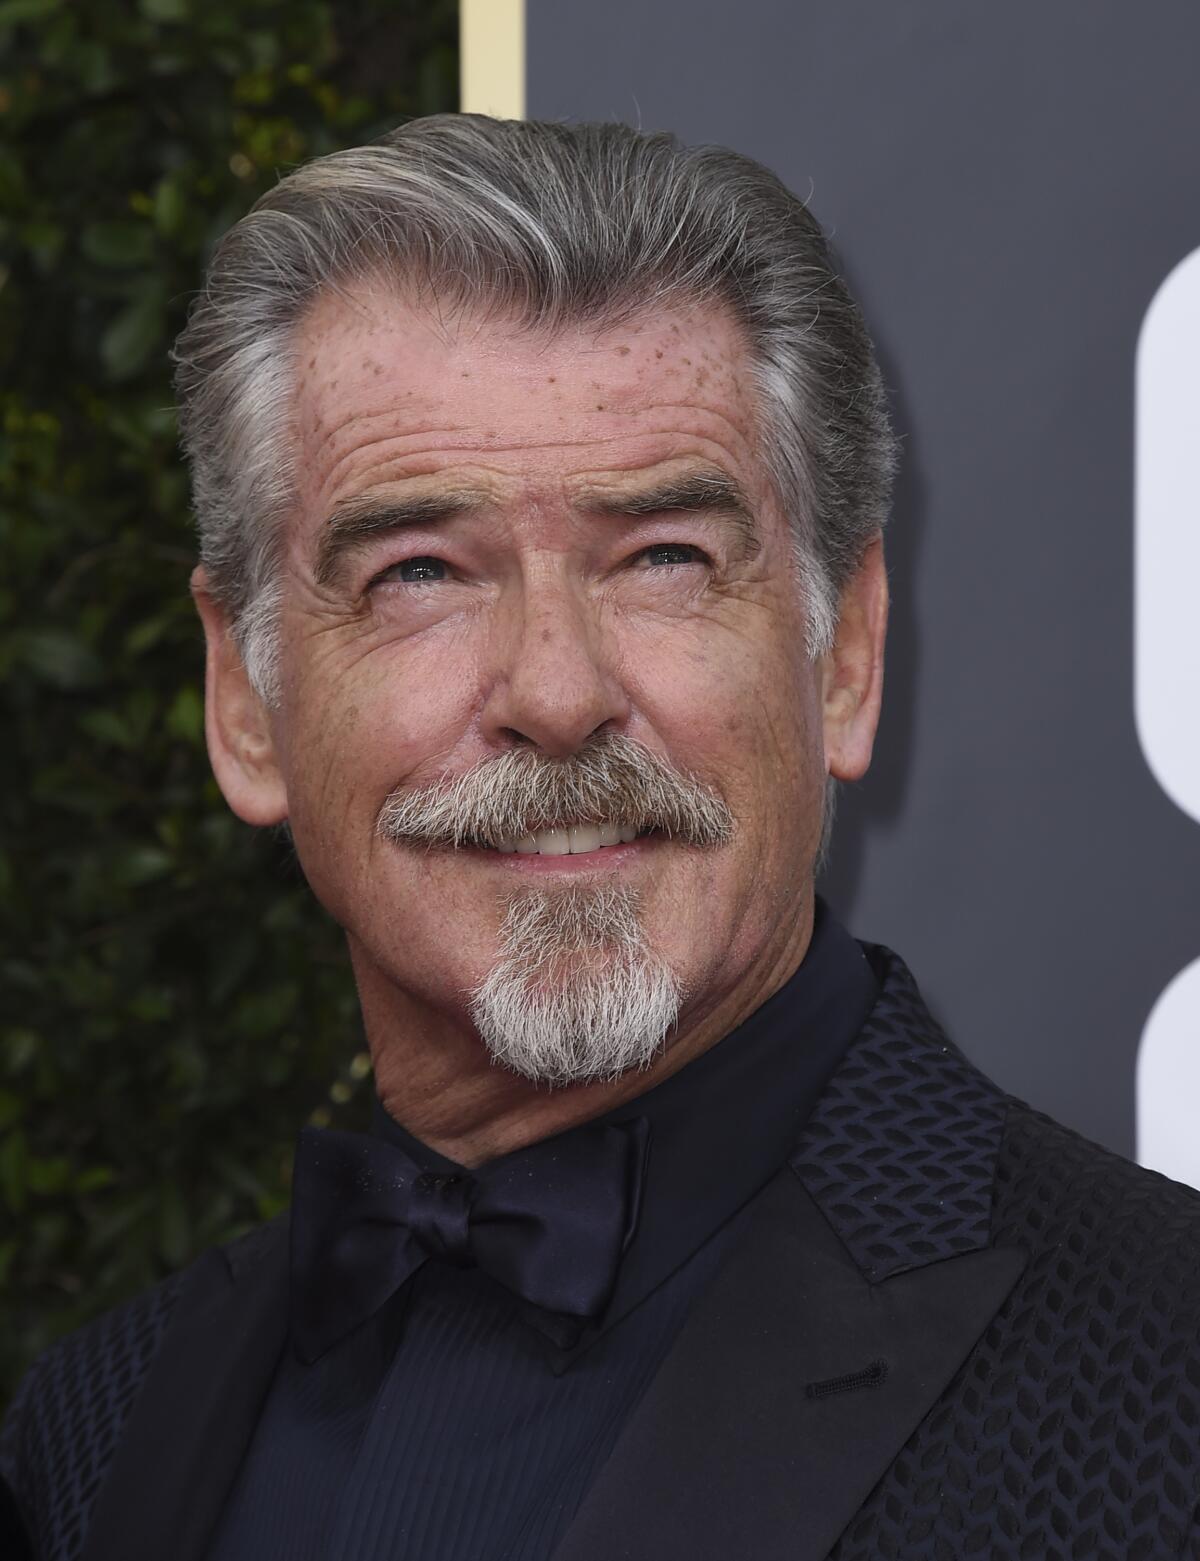 Pierce Brosnan with a mustache and goatee smiling